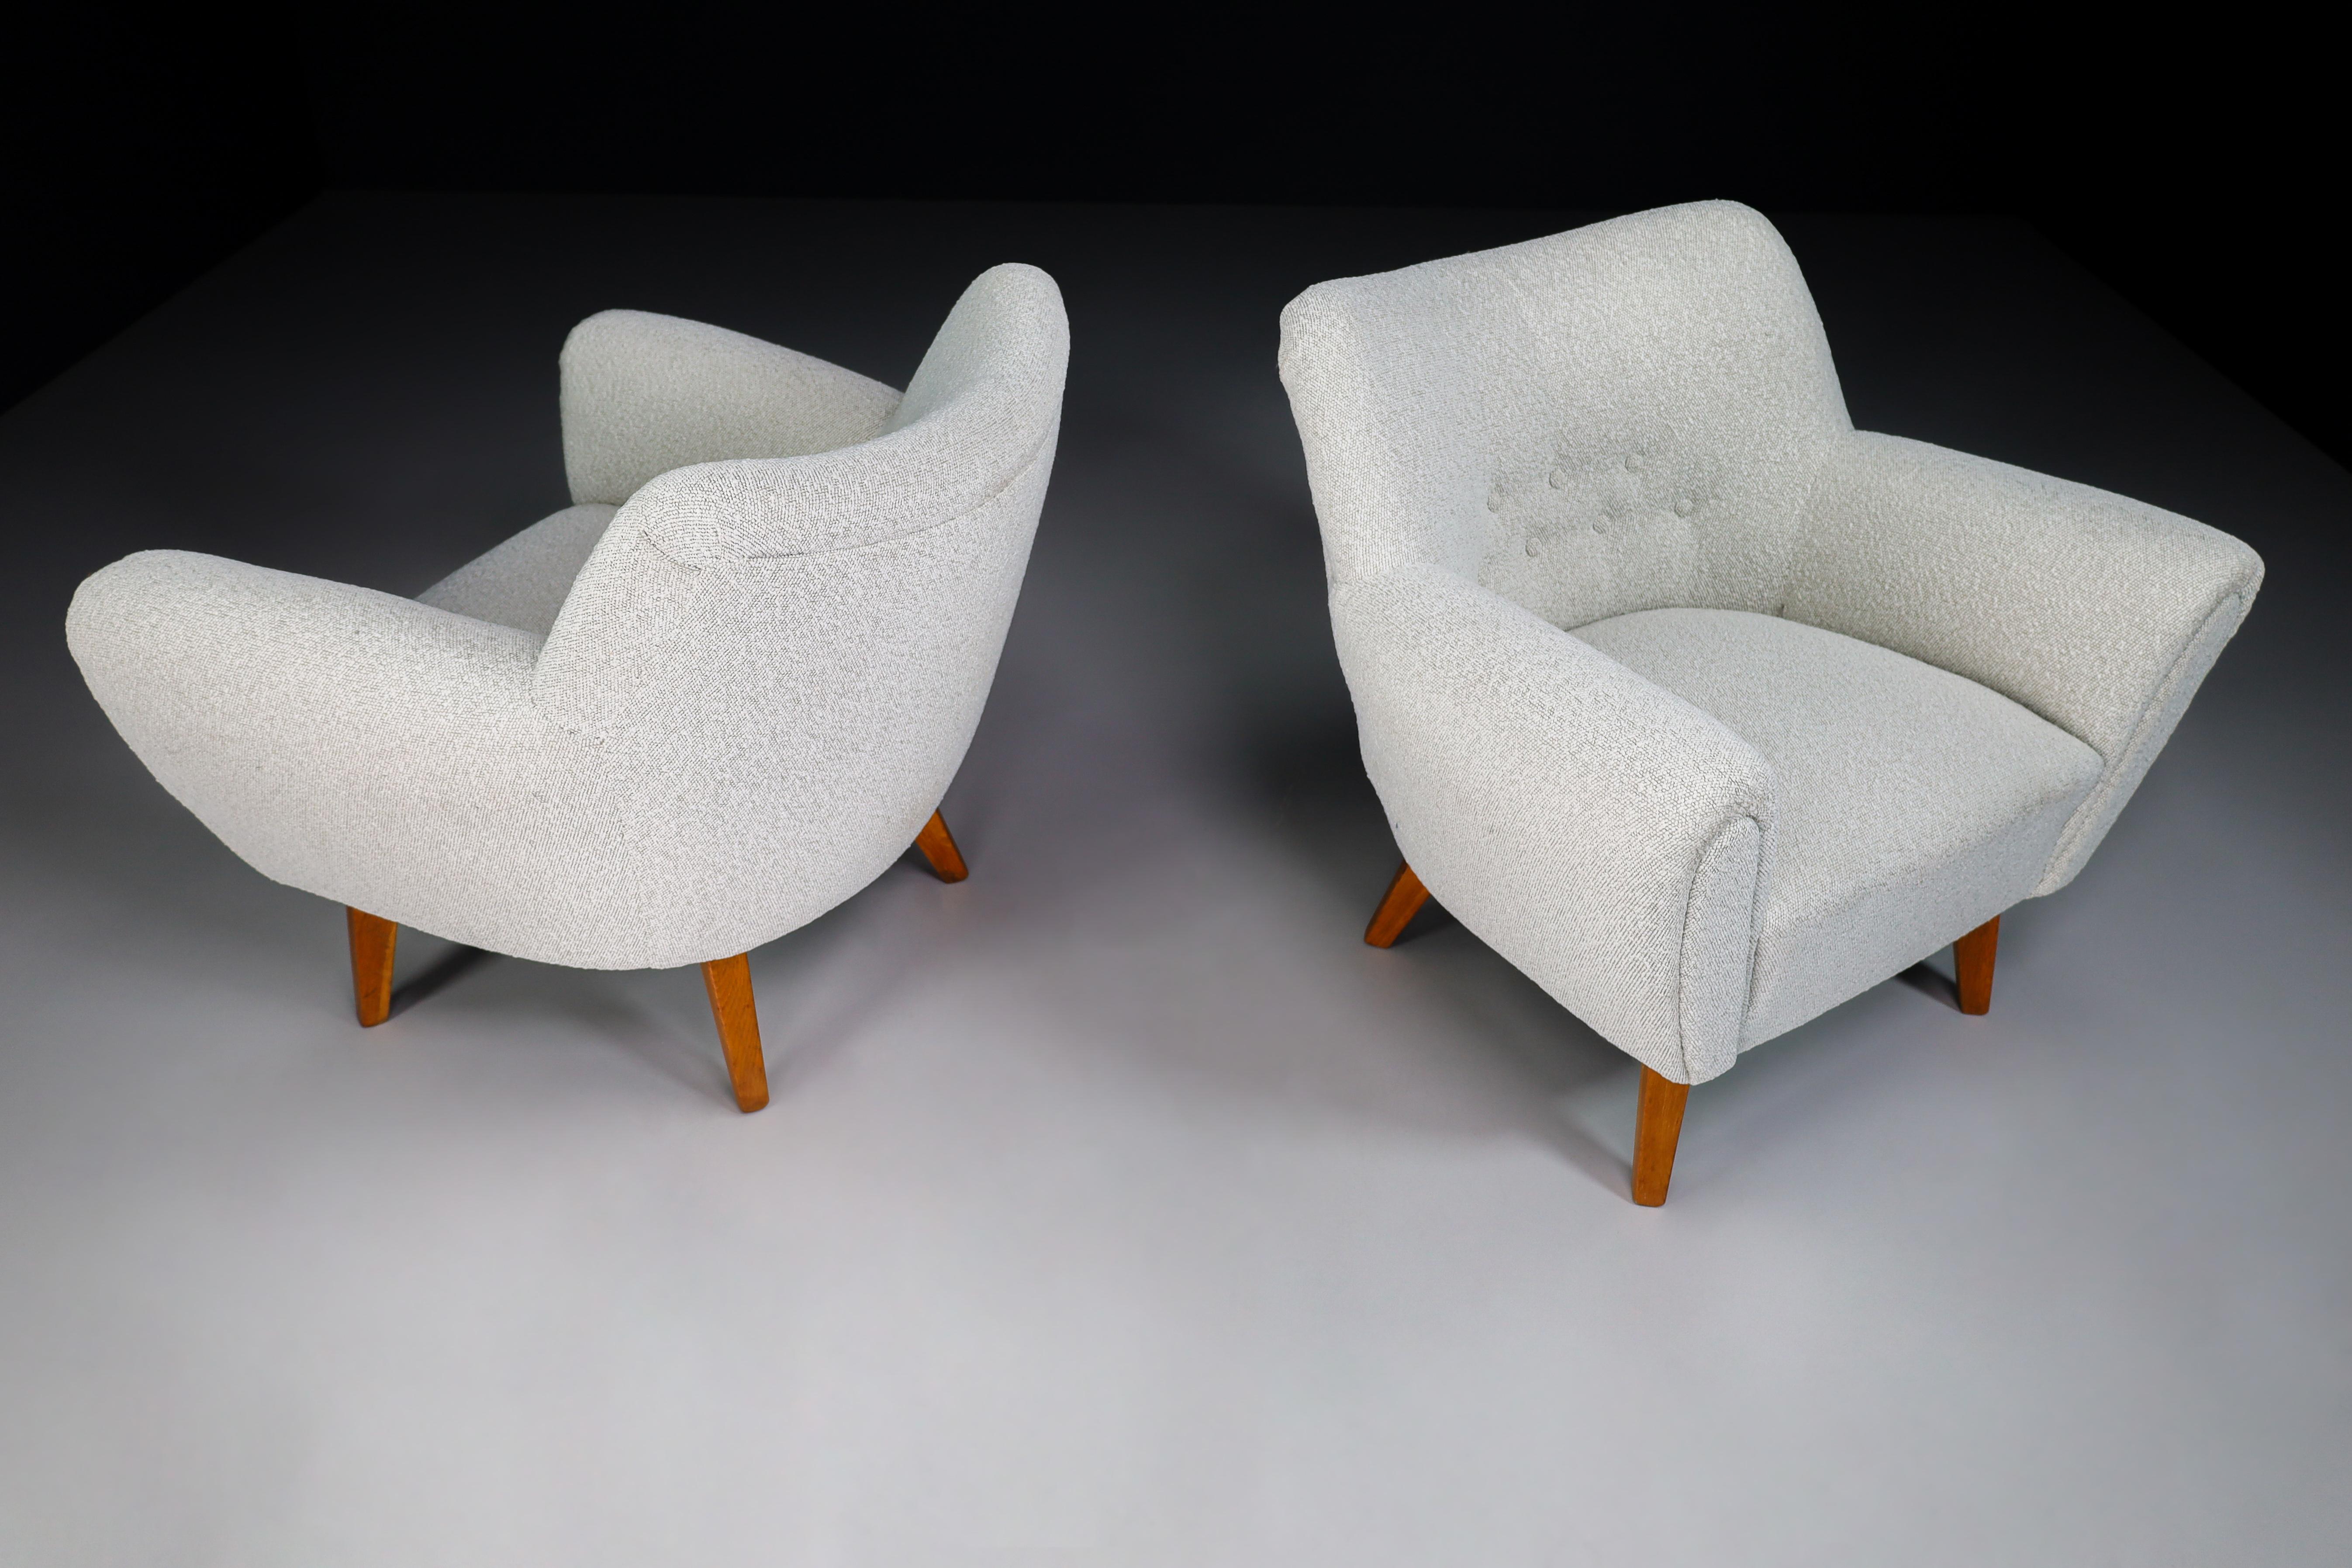 20th Century Midcentury Modern Lounge Chairs in Oak & Reupholstered Bouclé Fabric France 50s